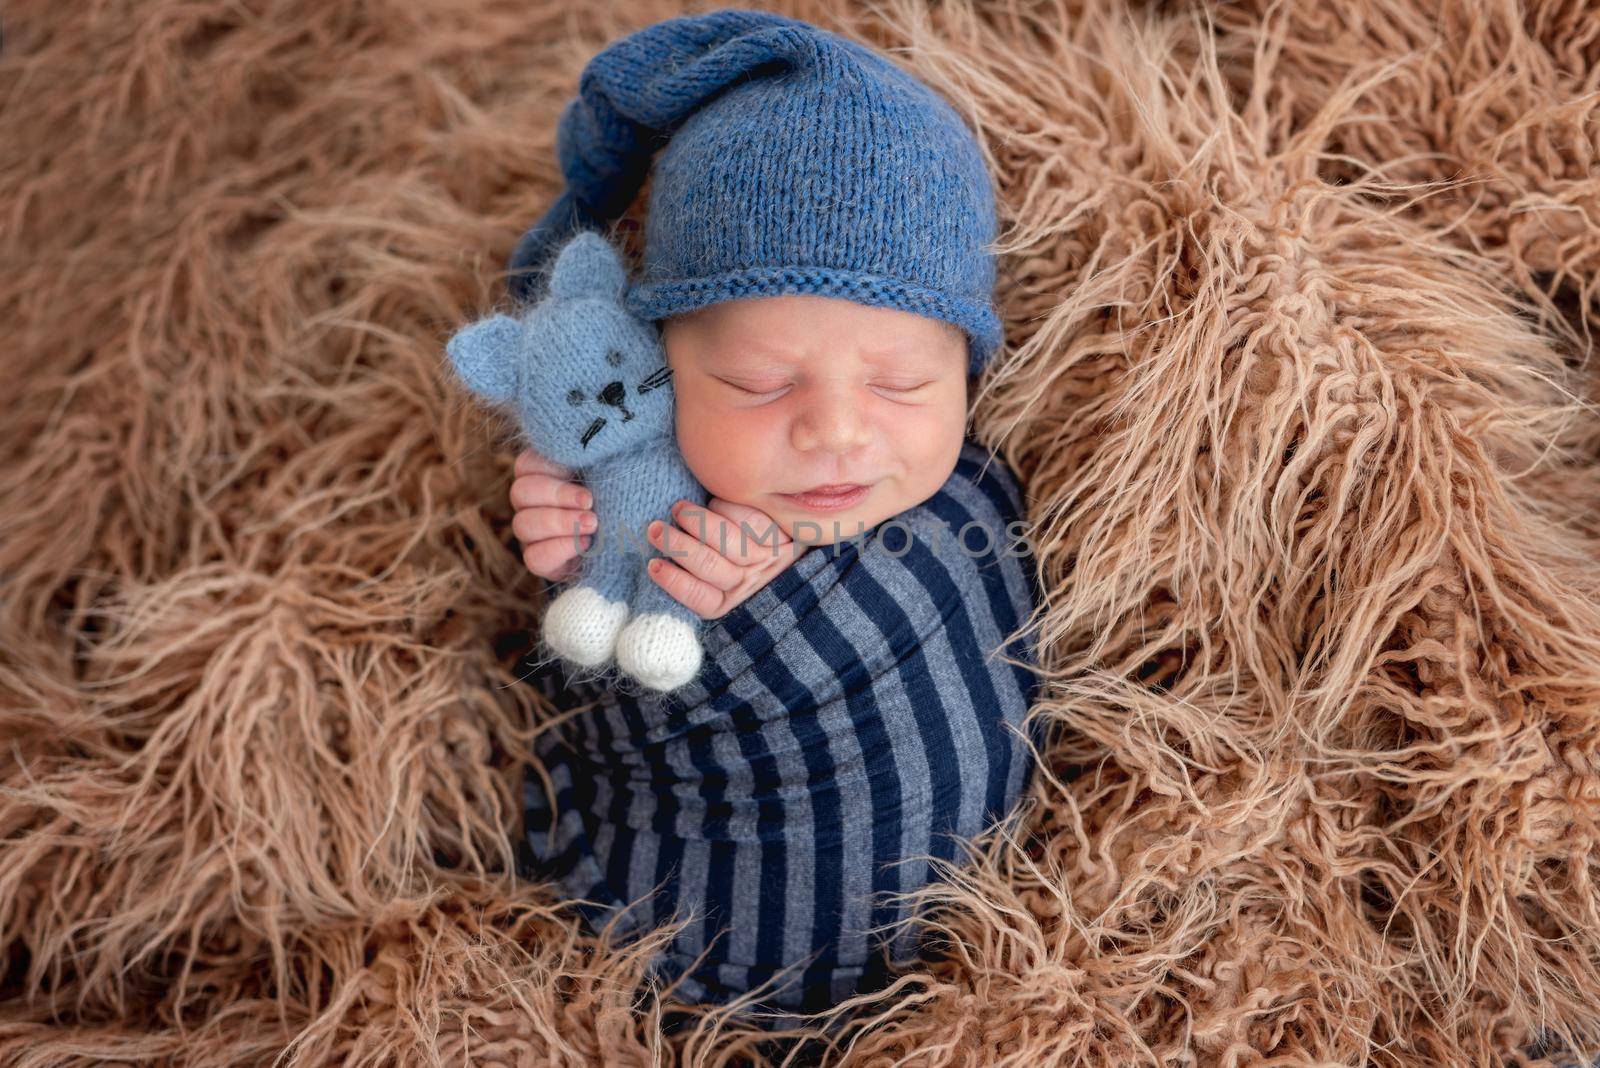 Adorable newborn baby boy swaddled in toby fabric hugging knitted toy and smiling during sleeping. Cute infant kid wearing hat napping in fur during studio photoshoot.